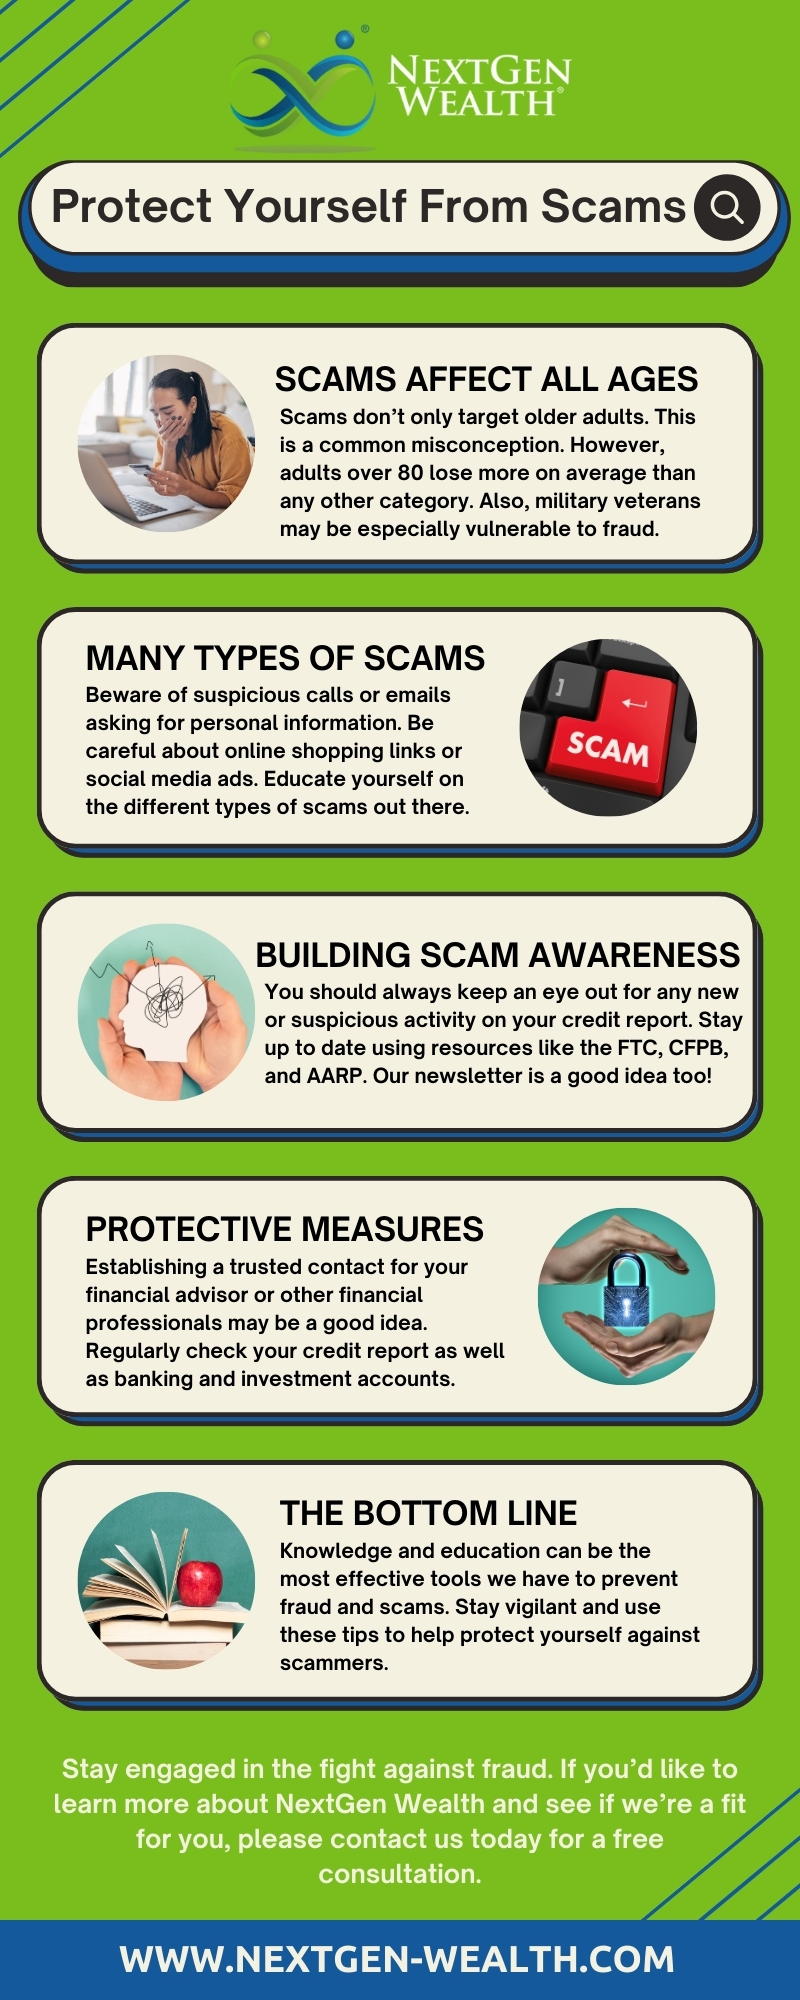 Tips on Avoiding Scams from AARP Infographic